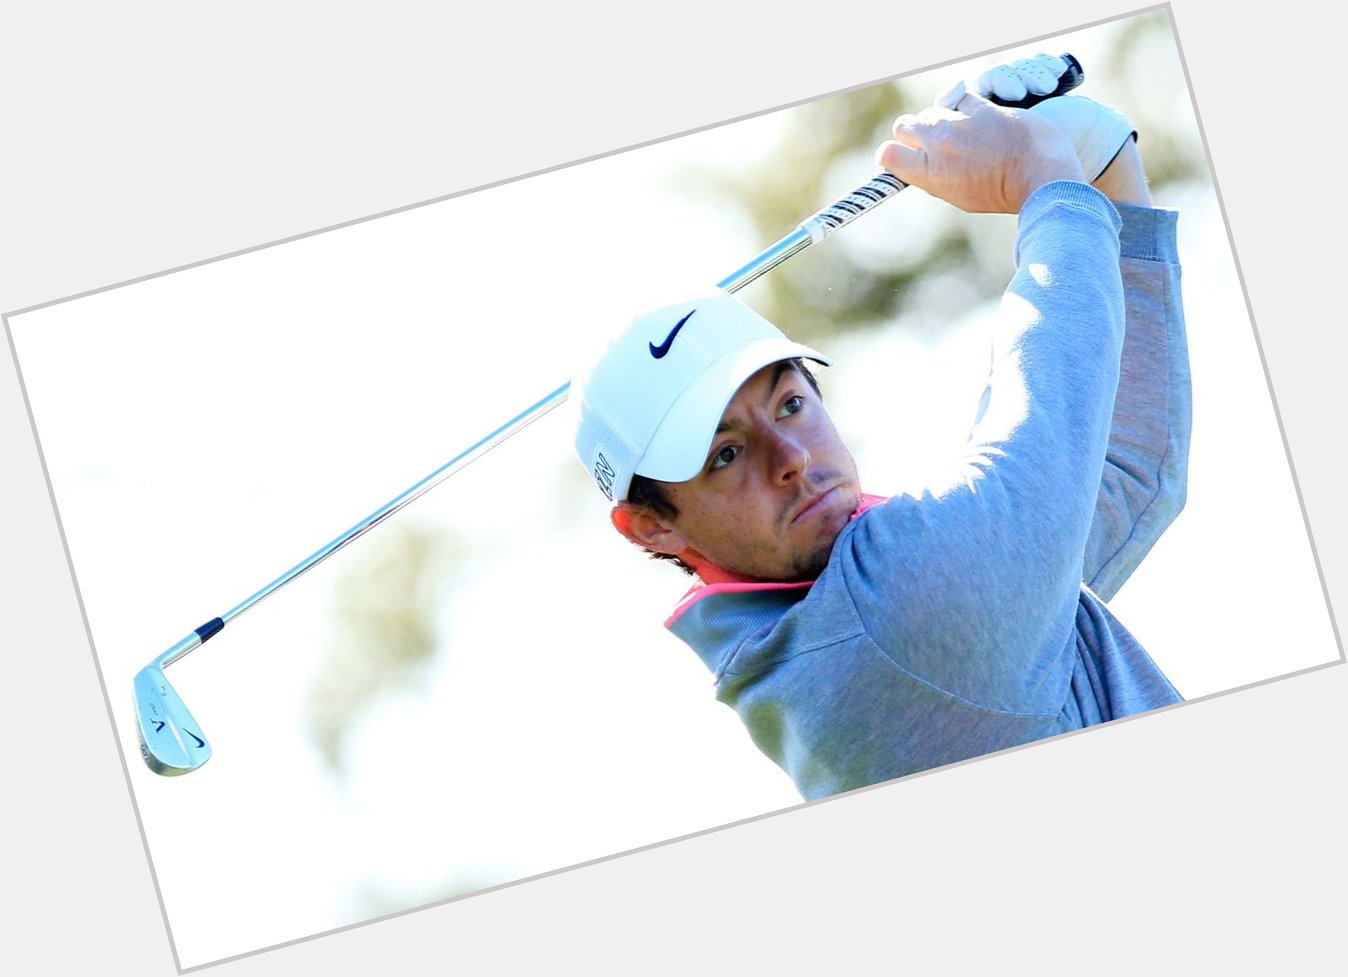 Happy birthday to four-time major championship winner, Rory McIlroy! 